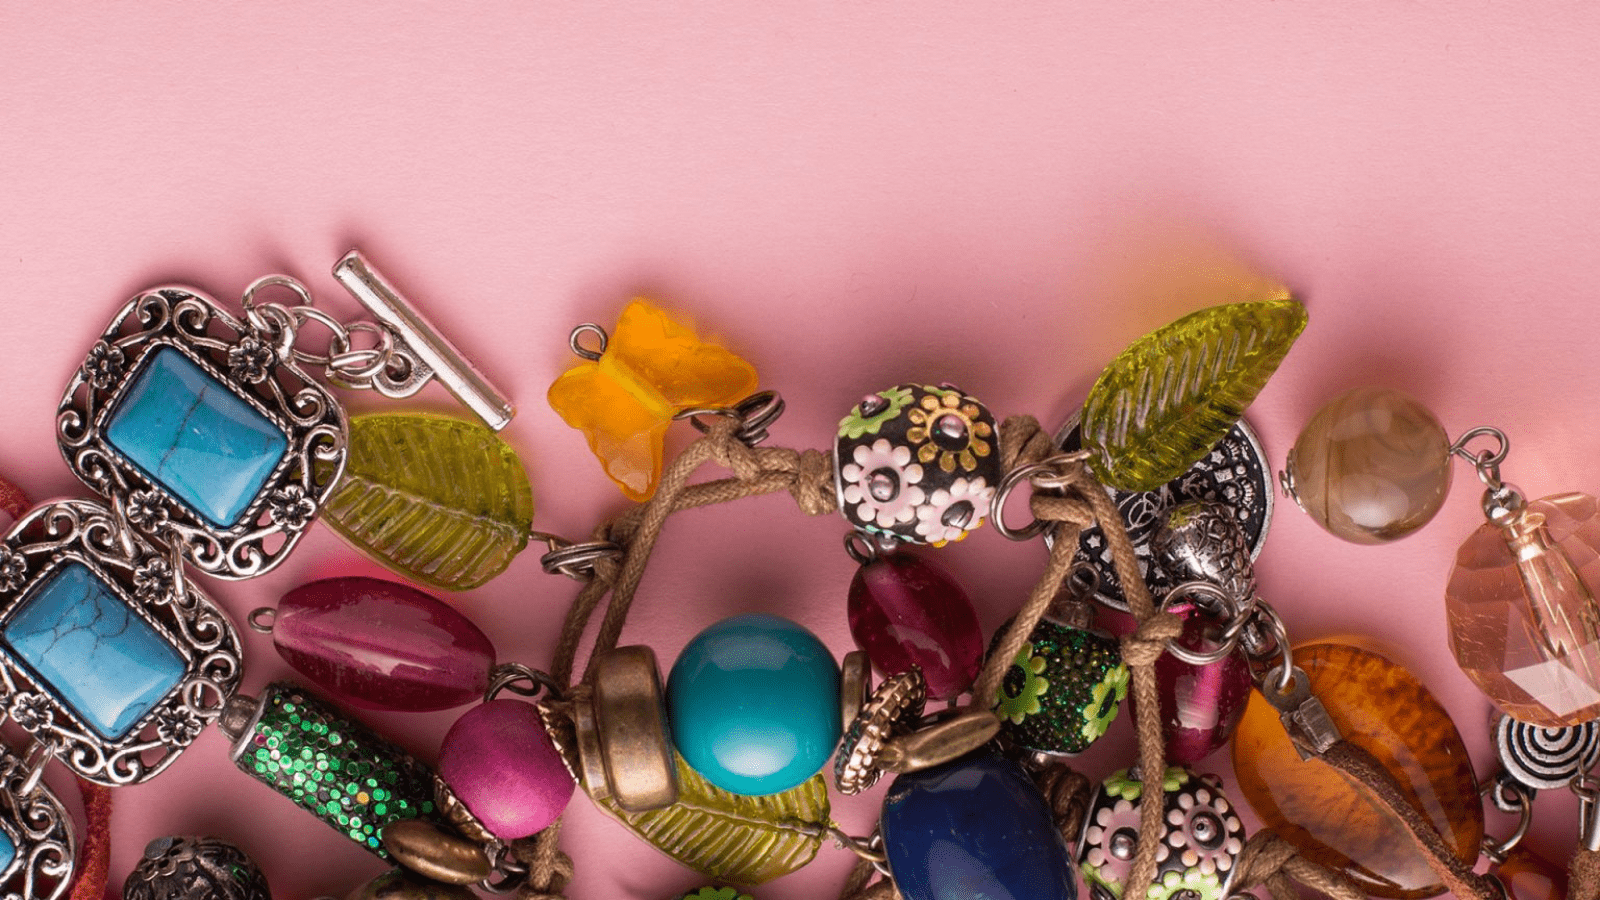 Here’s What You Didn’t Know About Handmade Jewellery